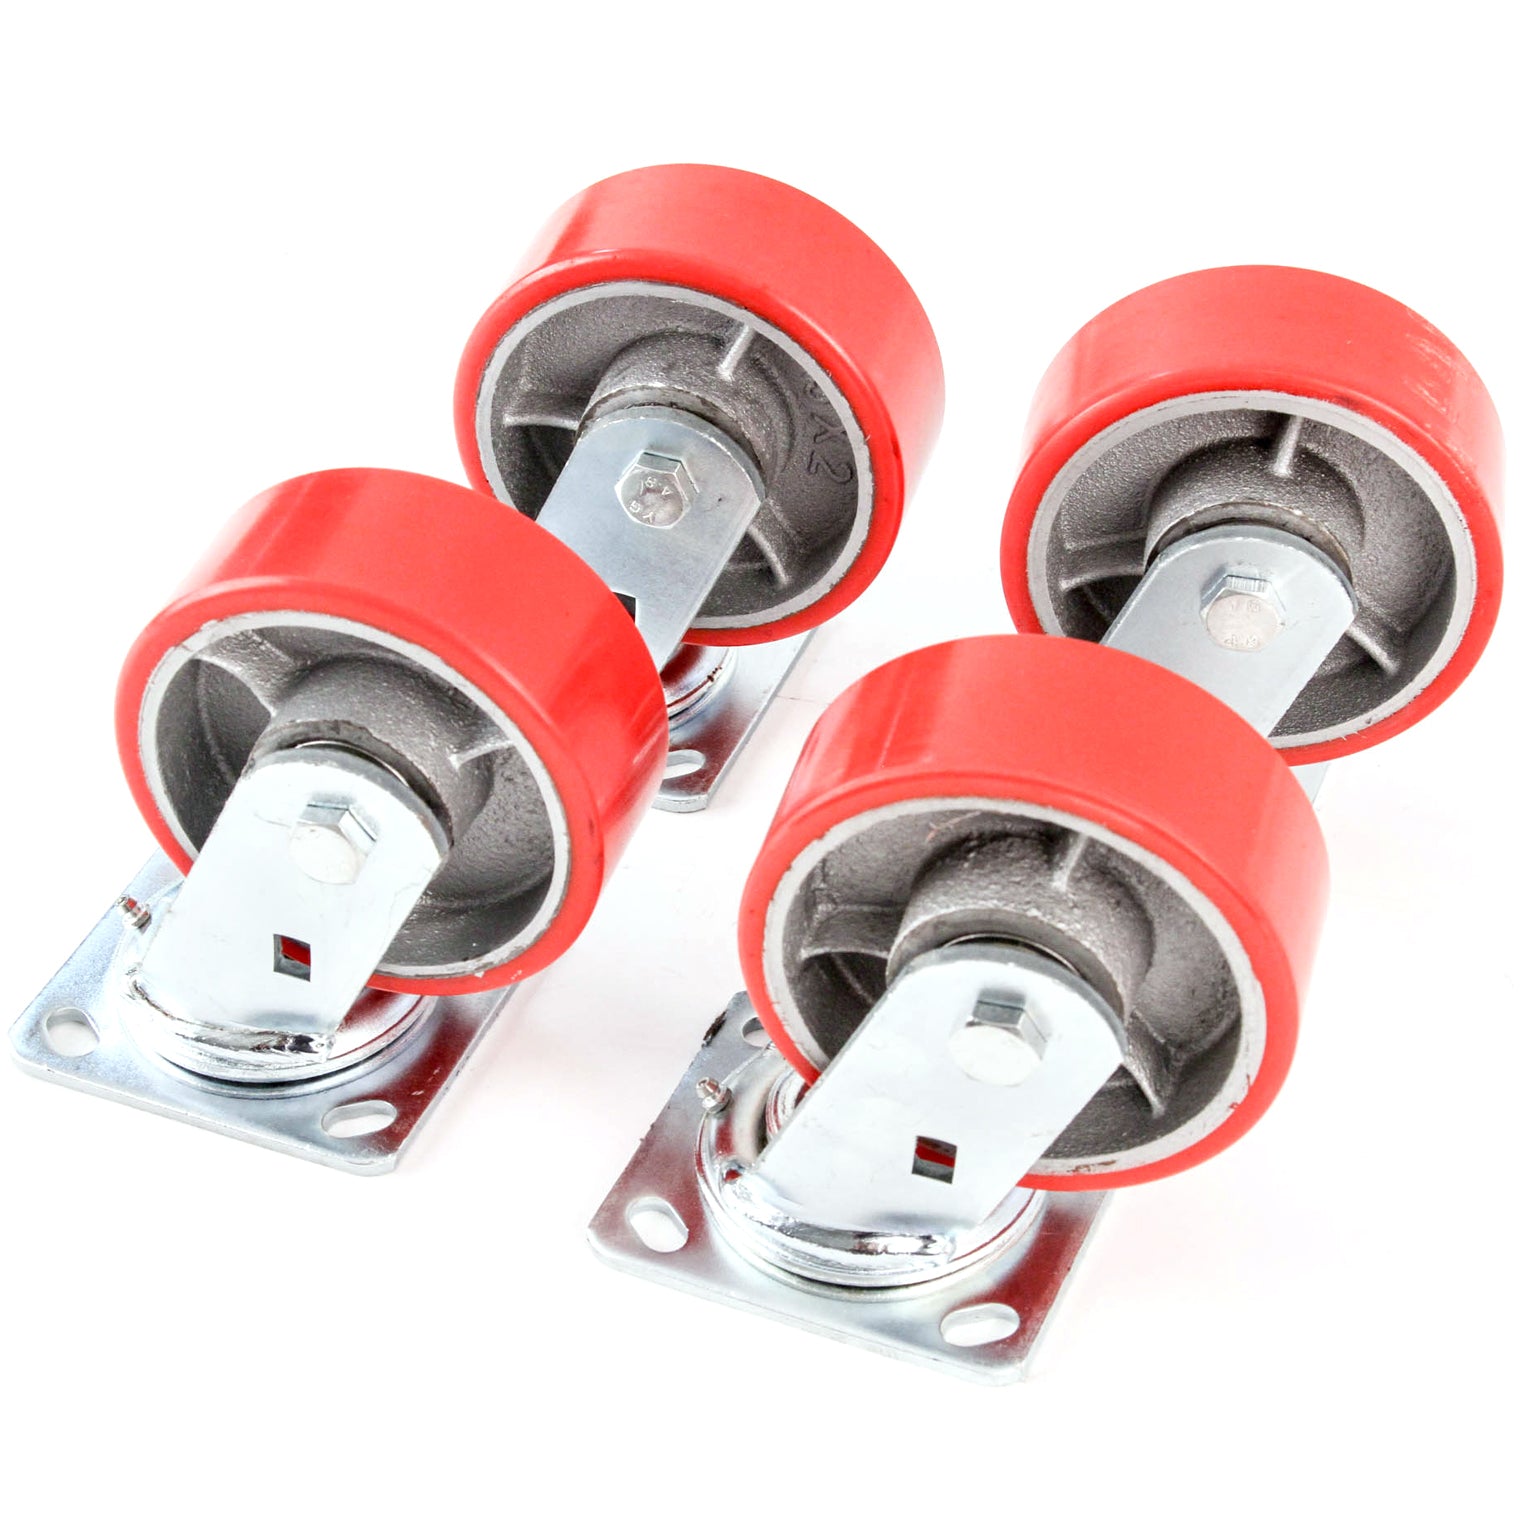 4 Red 5 Inches Heavy Duty Wheel Casters All Swivel Action Iron Hub No Mark Non Skid